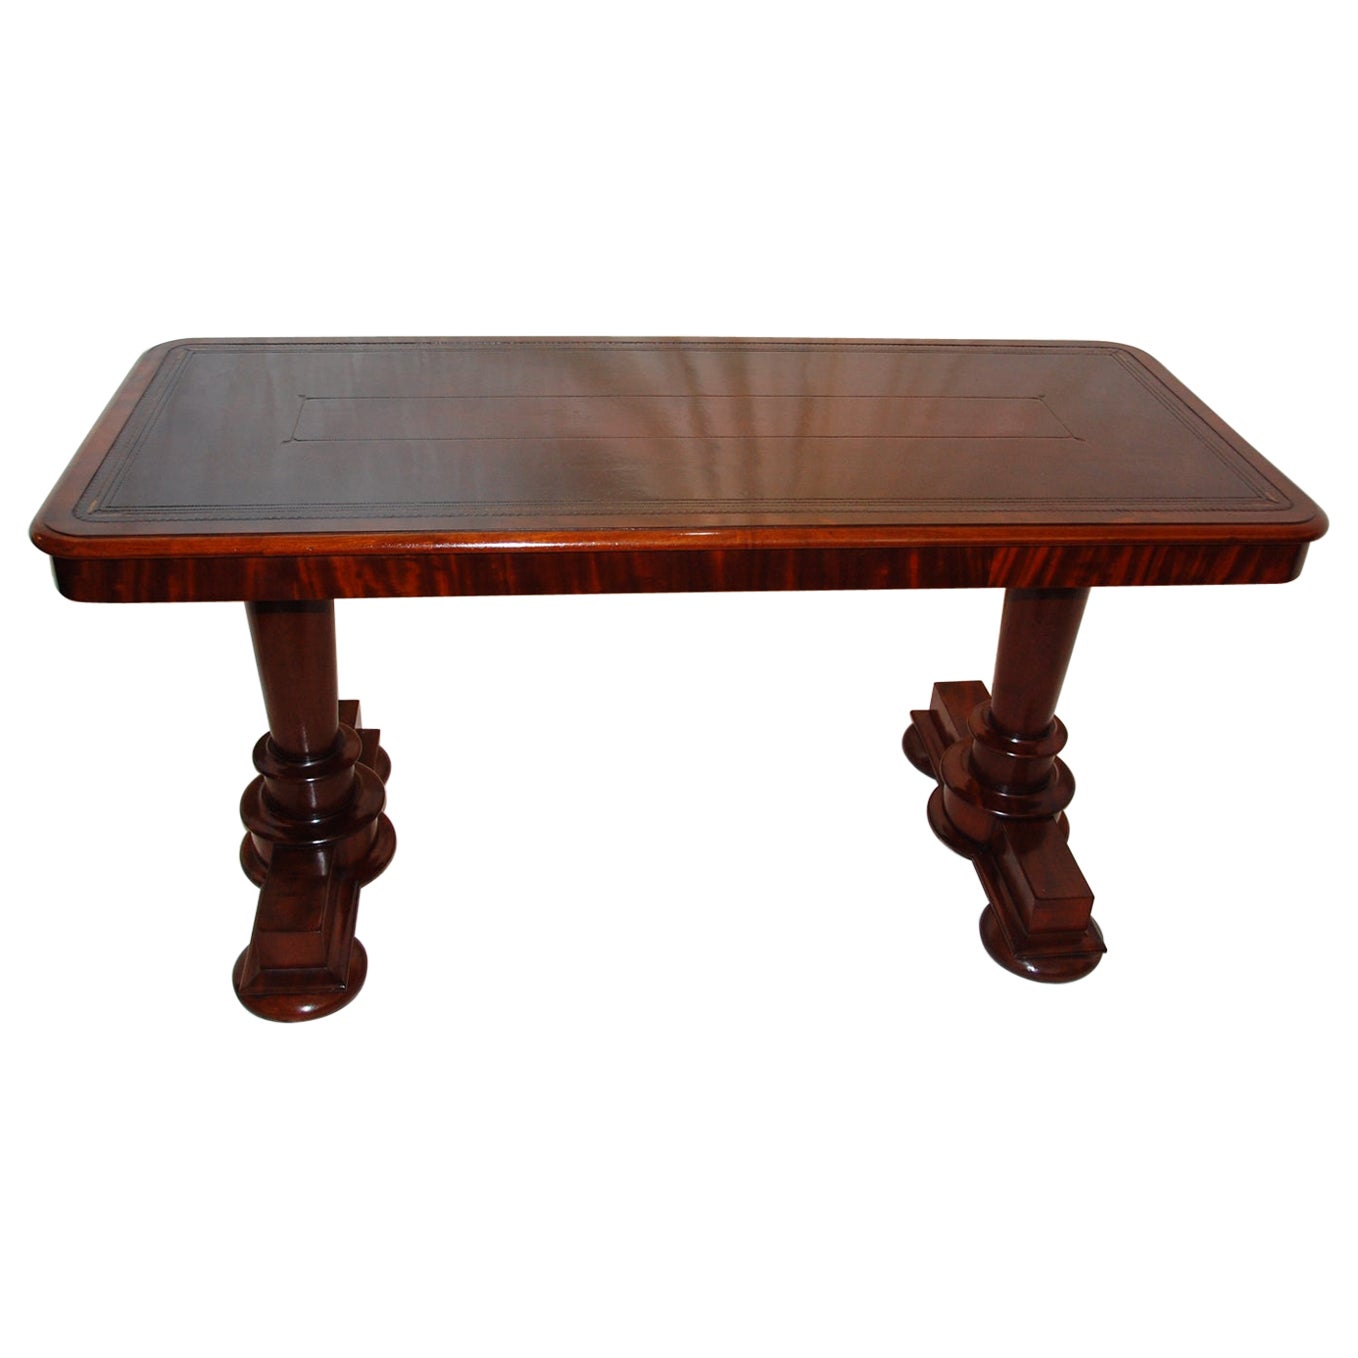 English Mid-19th Century Mahogany Writing, Library or Sofa Table Pedestal Ends For Sale